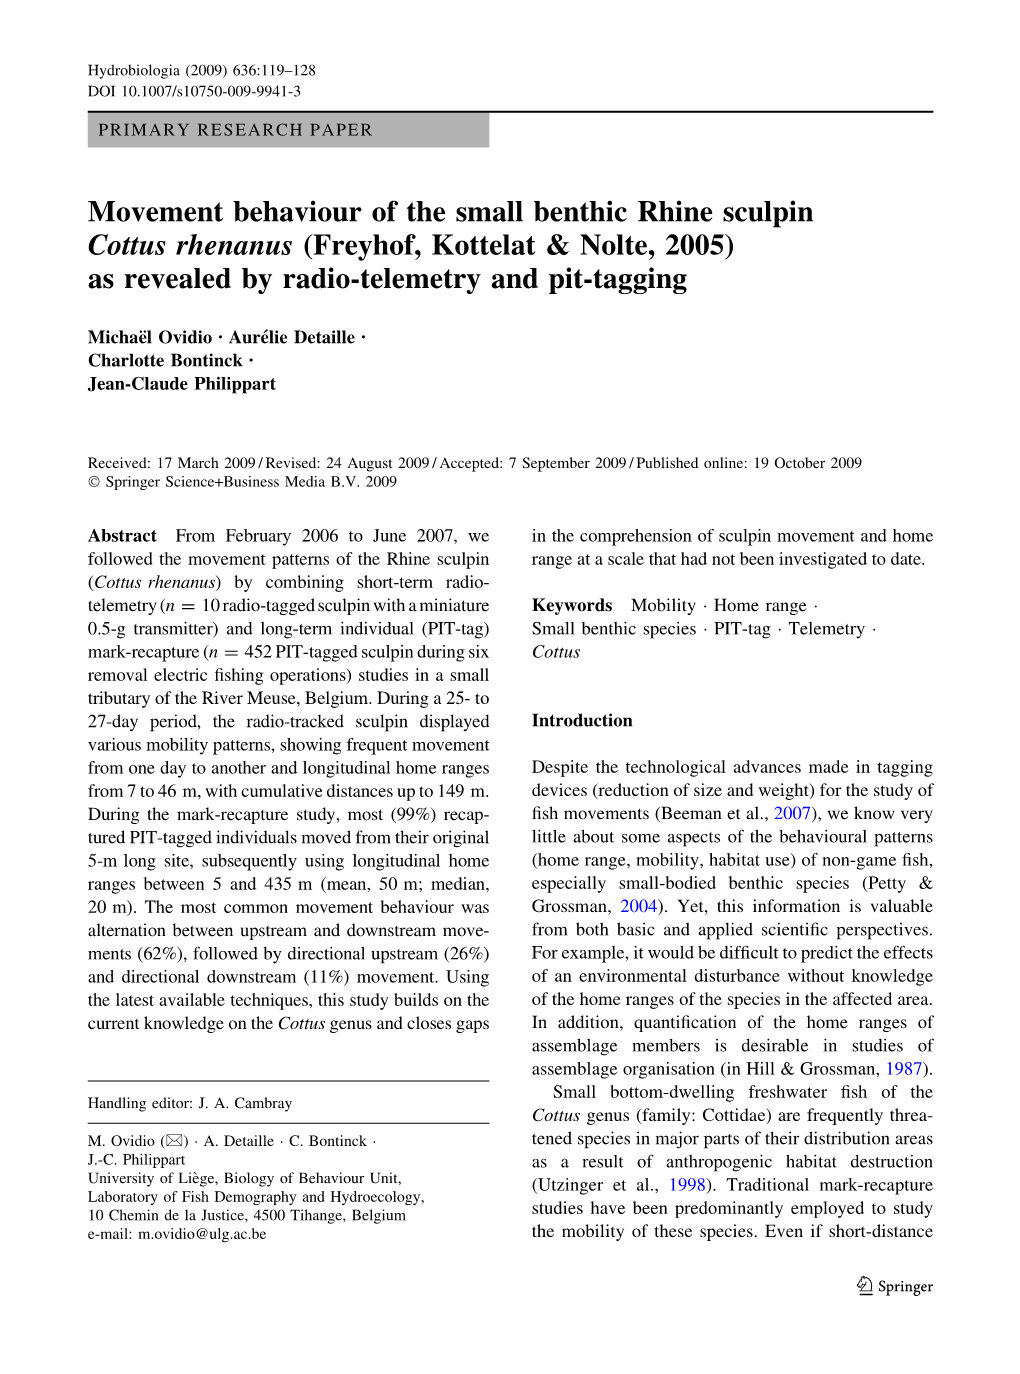 Movement Behaviour of the Small Benthic Rhine Sculpin Cottus Rhenanus (Freyhof, Kottelat & Nolte, 2005) As Revealed by Radio-Telemetry and Pit-Tagging